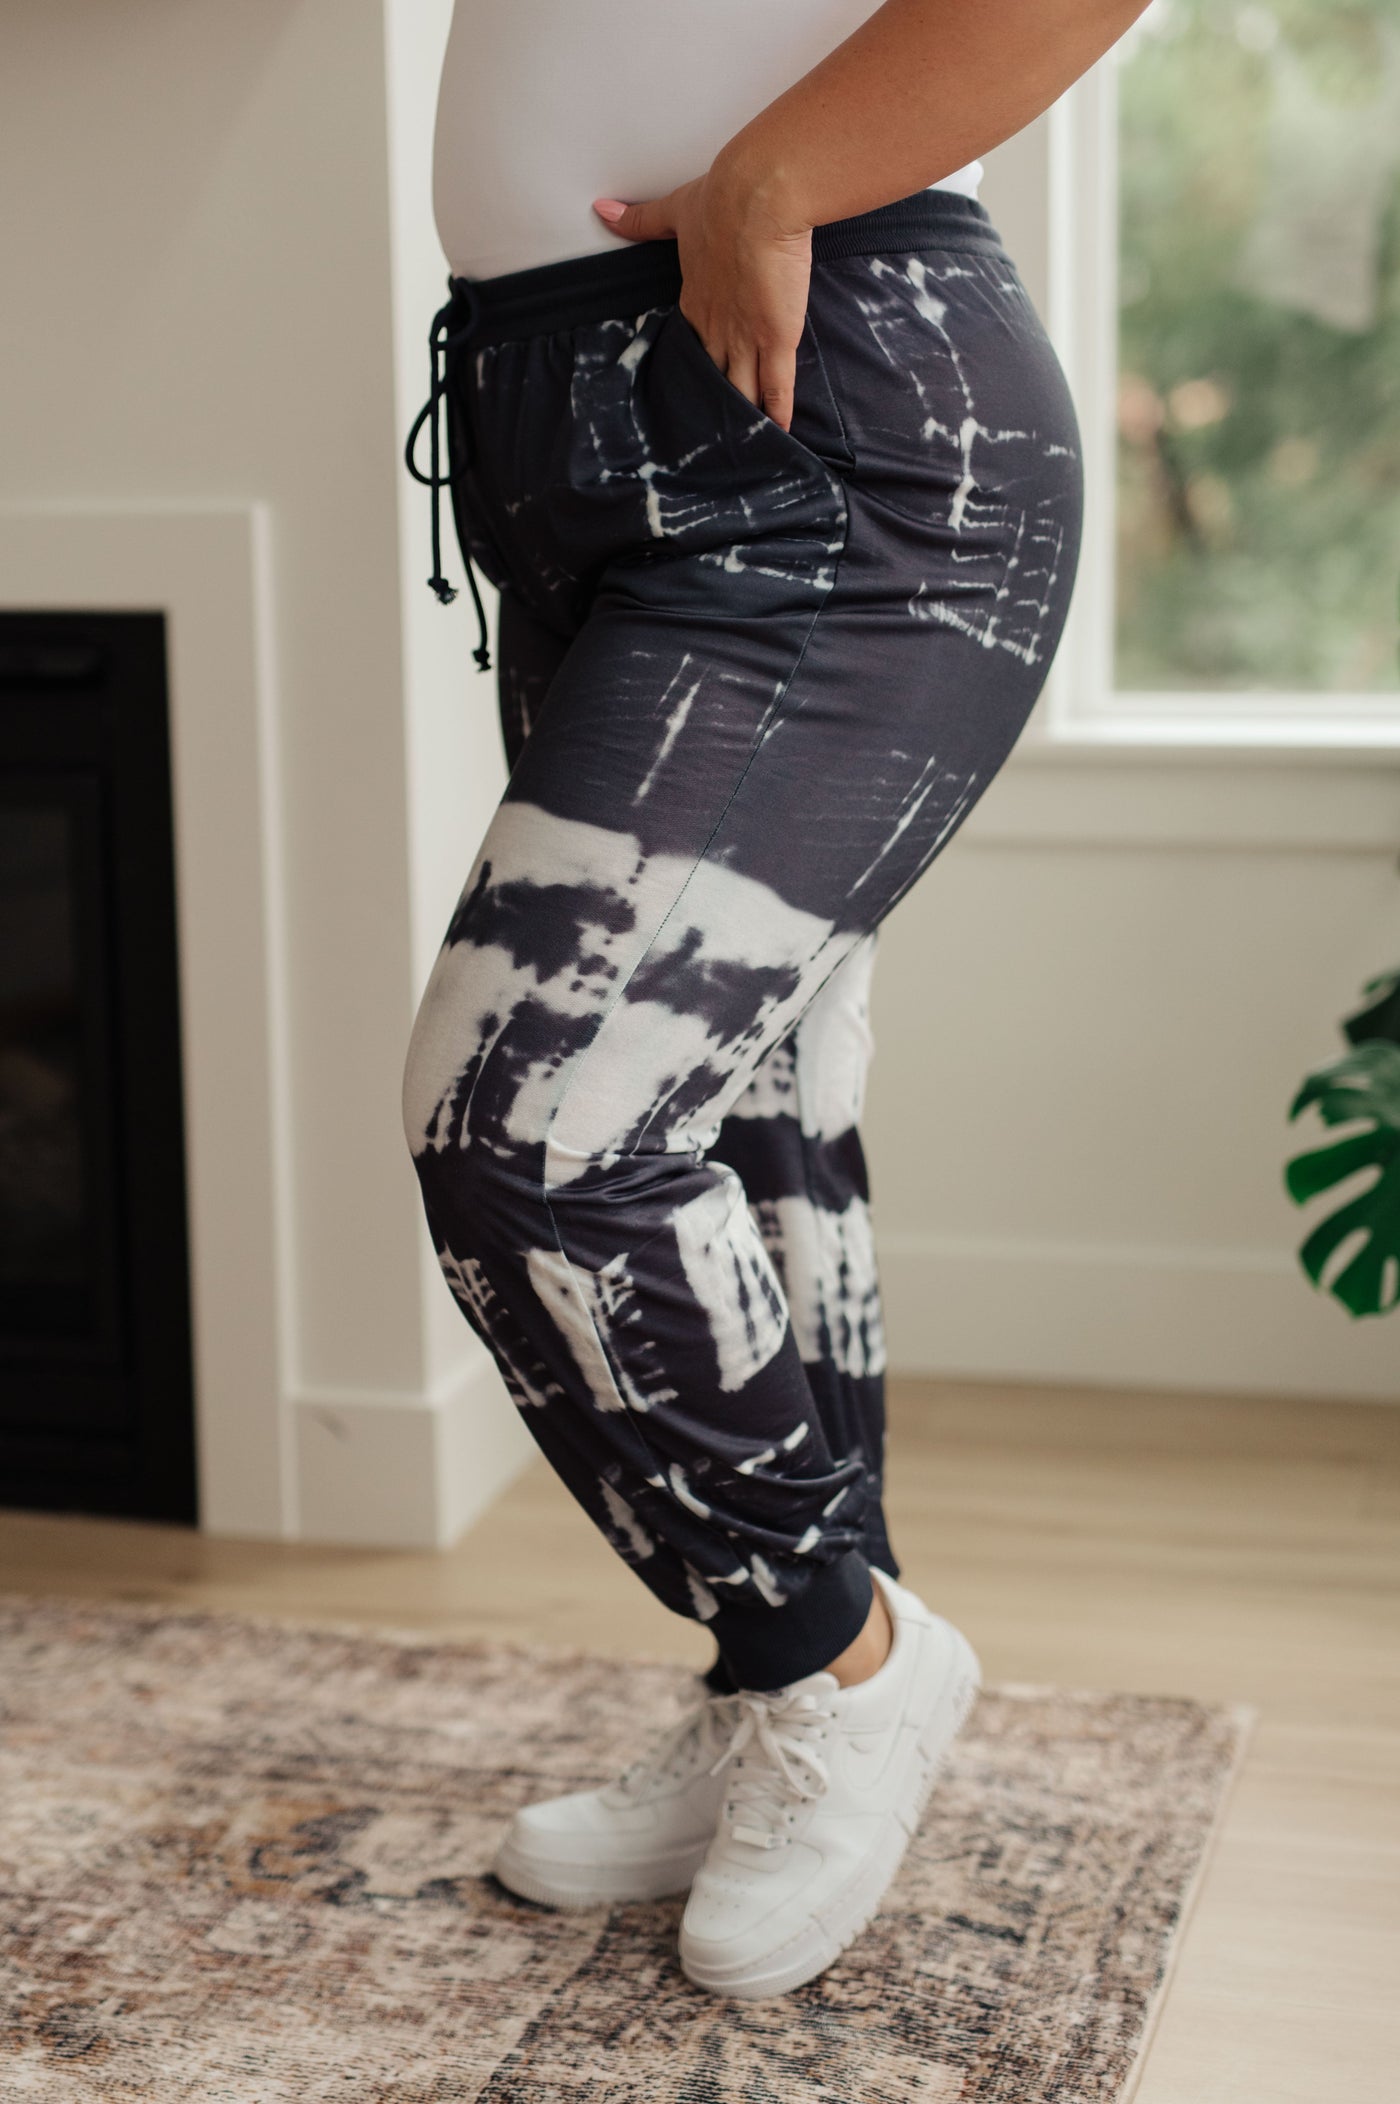 With a tie dye pattern, jogger silhouette and elastic waistband with drawstring, you’ll be on trend and comfortable all day.